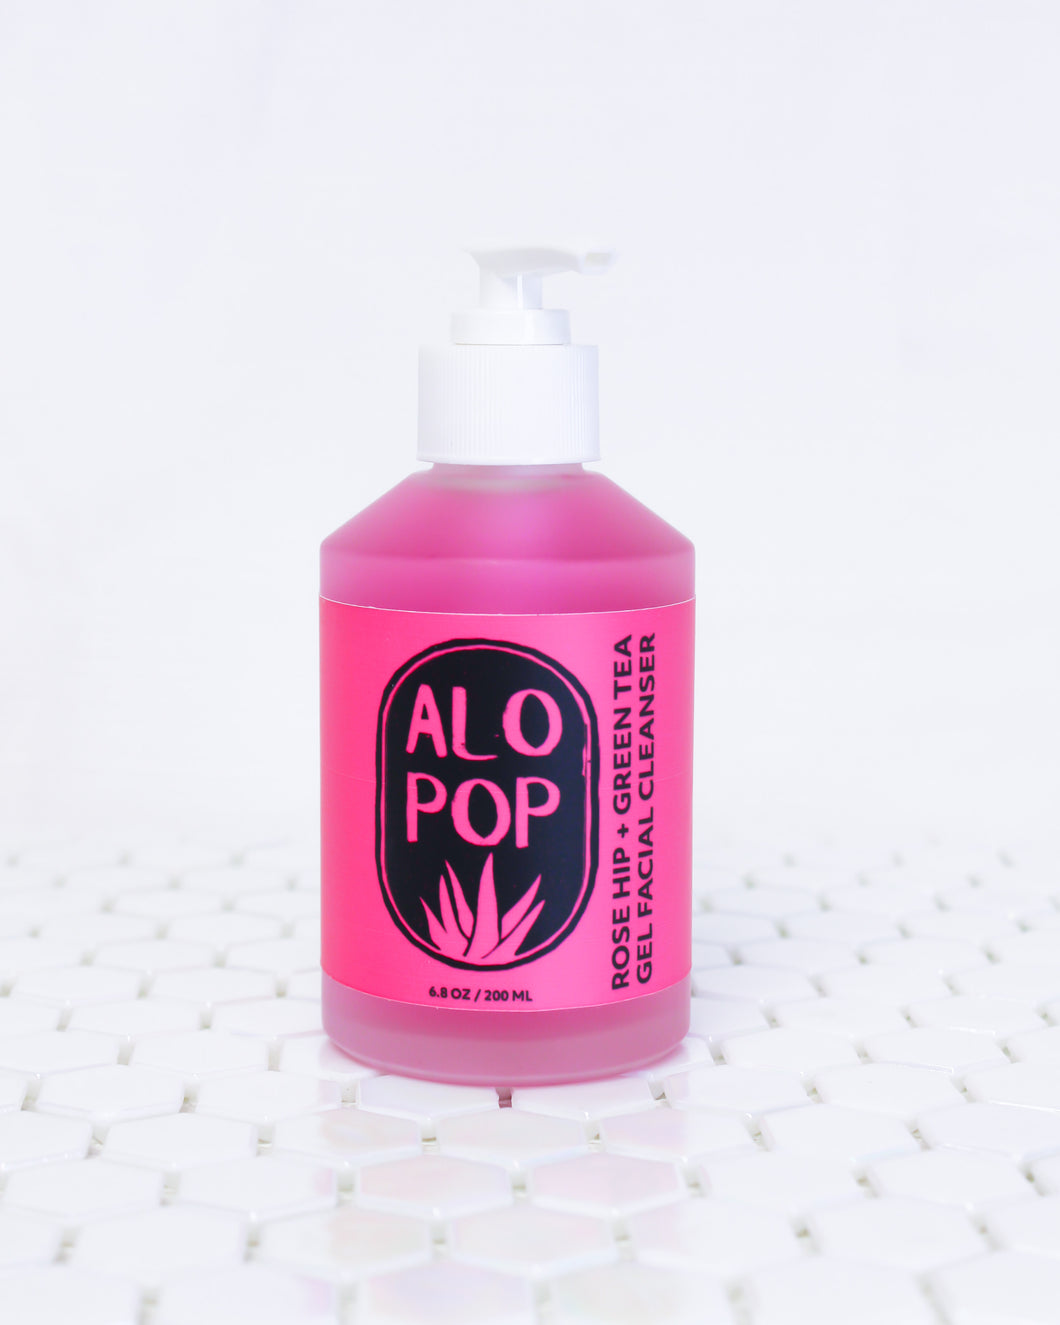 Glass bottle of Rose Hip and Green Tea Gel facial cleanser. Gel is hot pink with a white pump top lid and a hot pink label with black text on it. The text has the ALOPOP logo and product title. The gentle face wash bottle is sitting on geometric white tiles with the white background behind it.